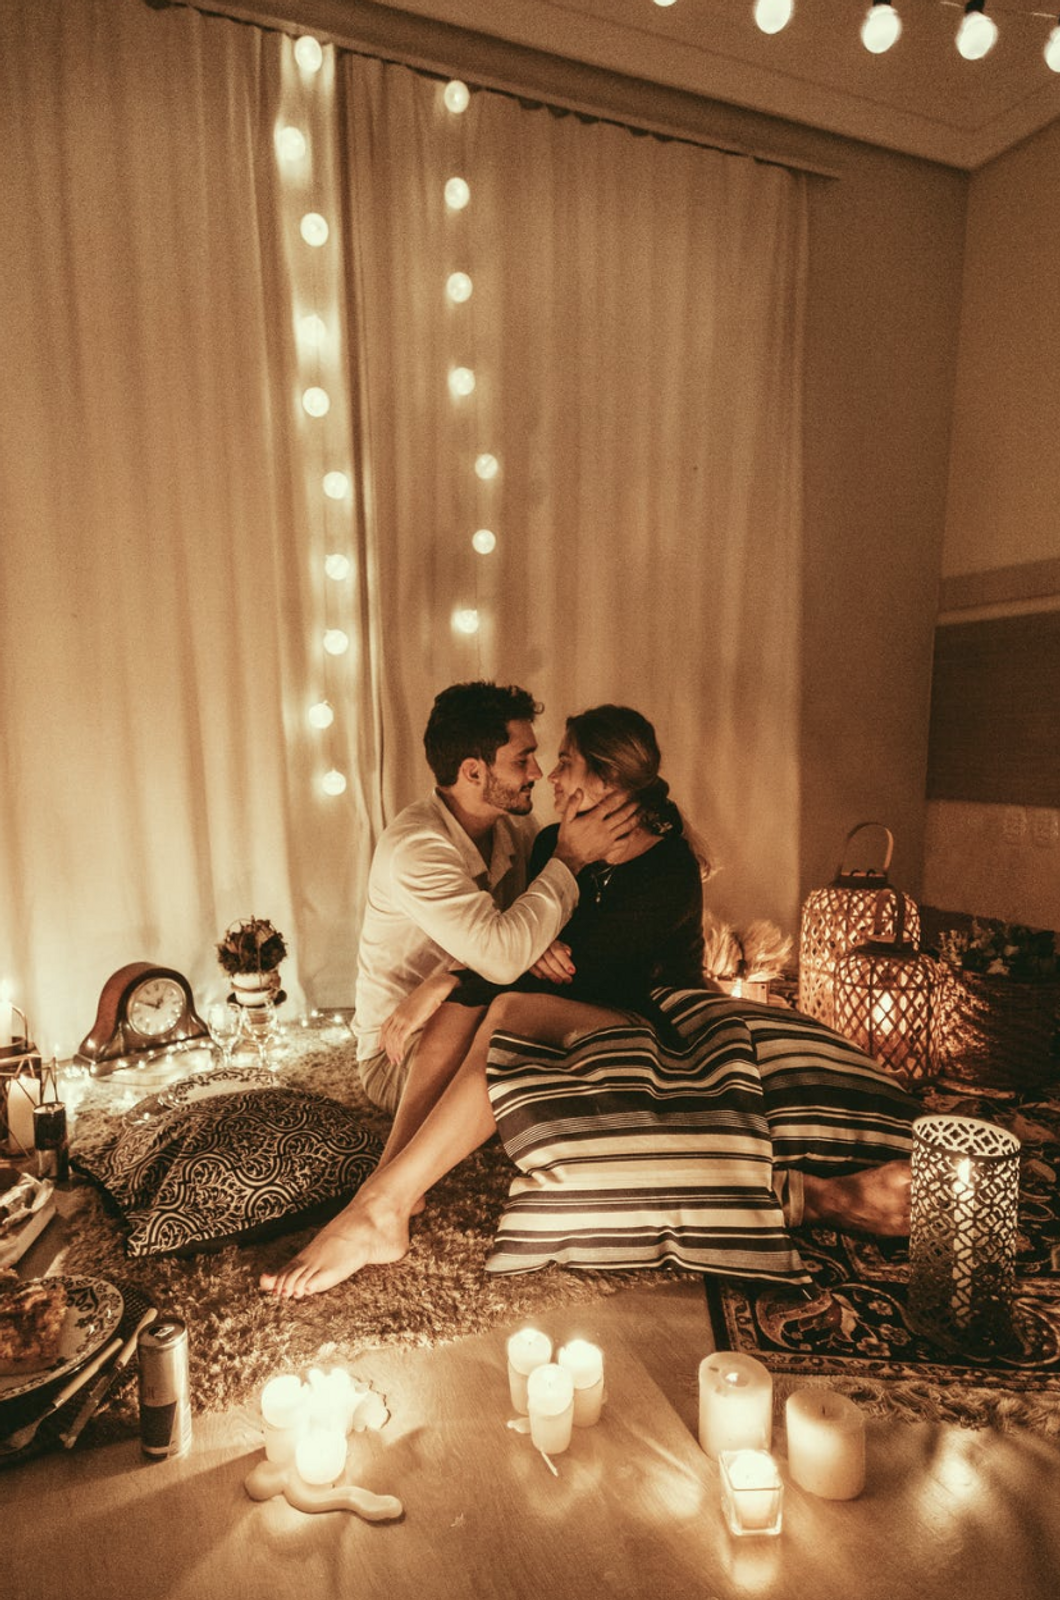 11 Things To Understand About Your S.O., Whose Love Language Is Primarily Quality Time